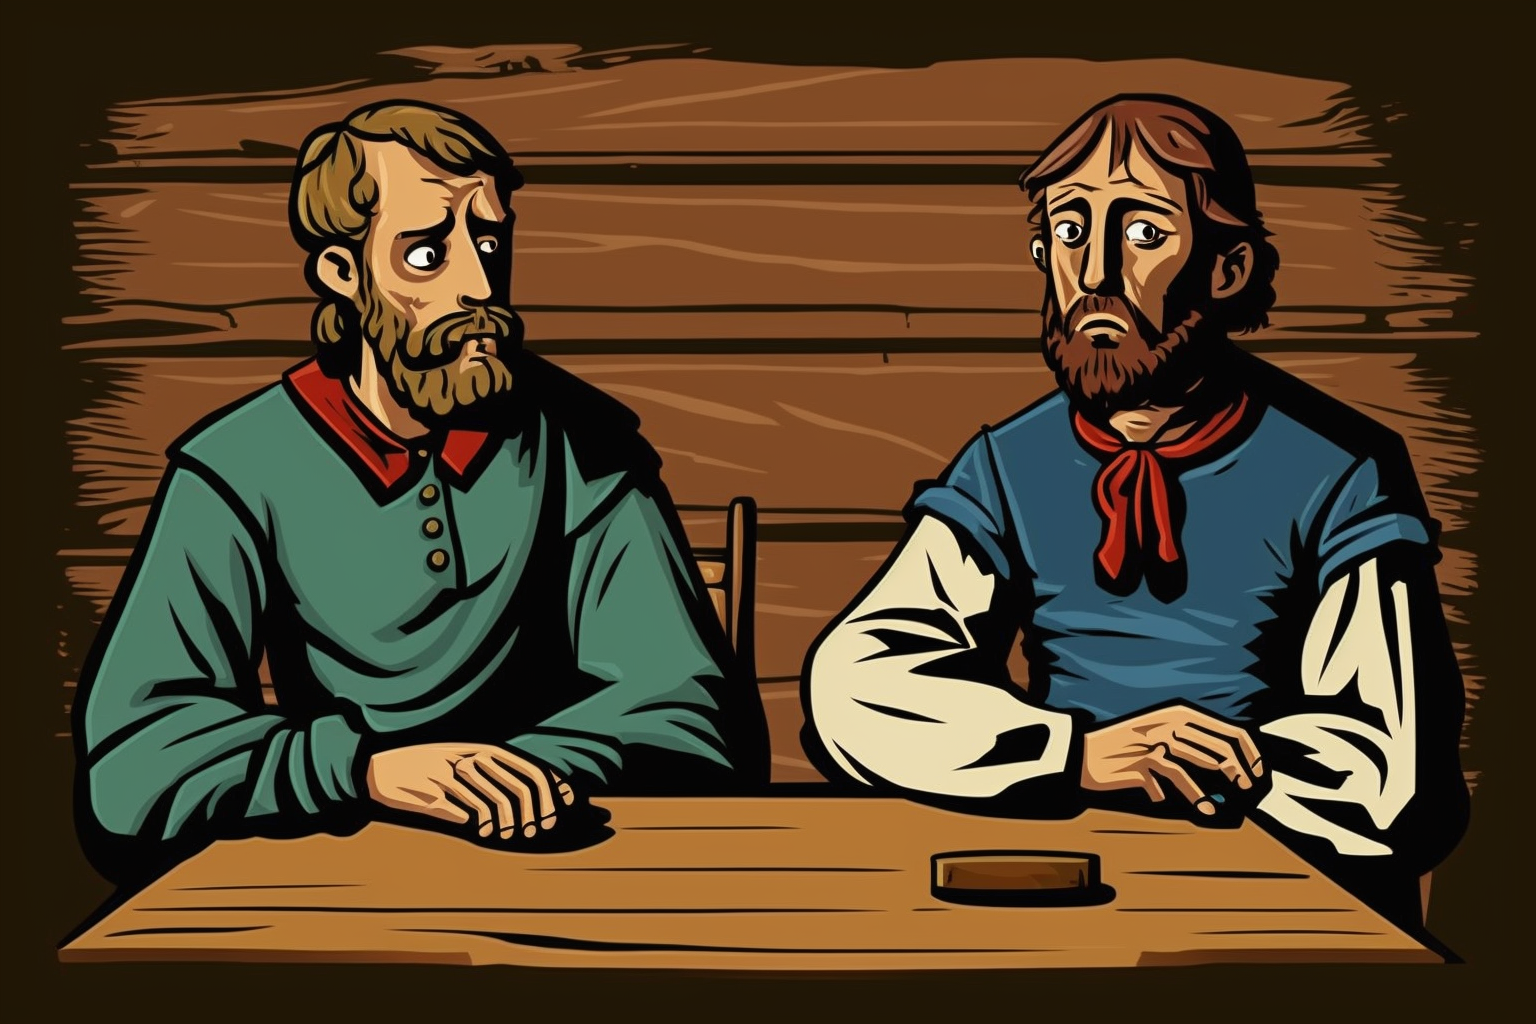 two confused looking men in medieval peasant garb sit at a wooden table in front of a wooden wall